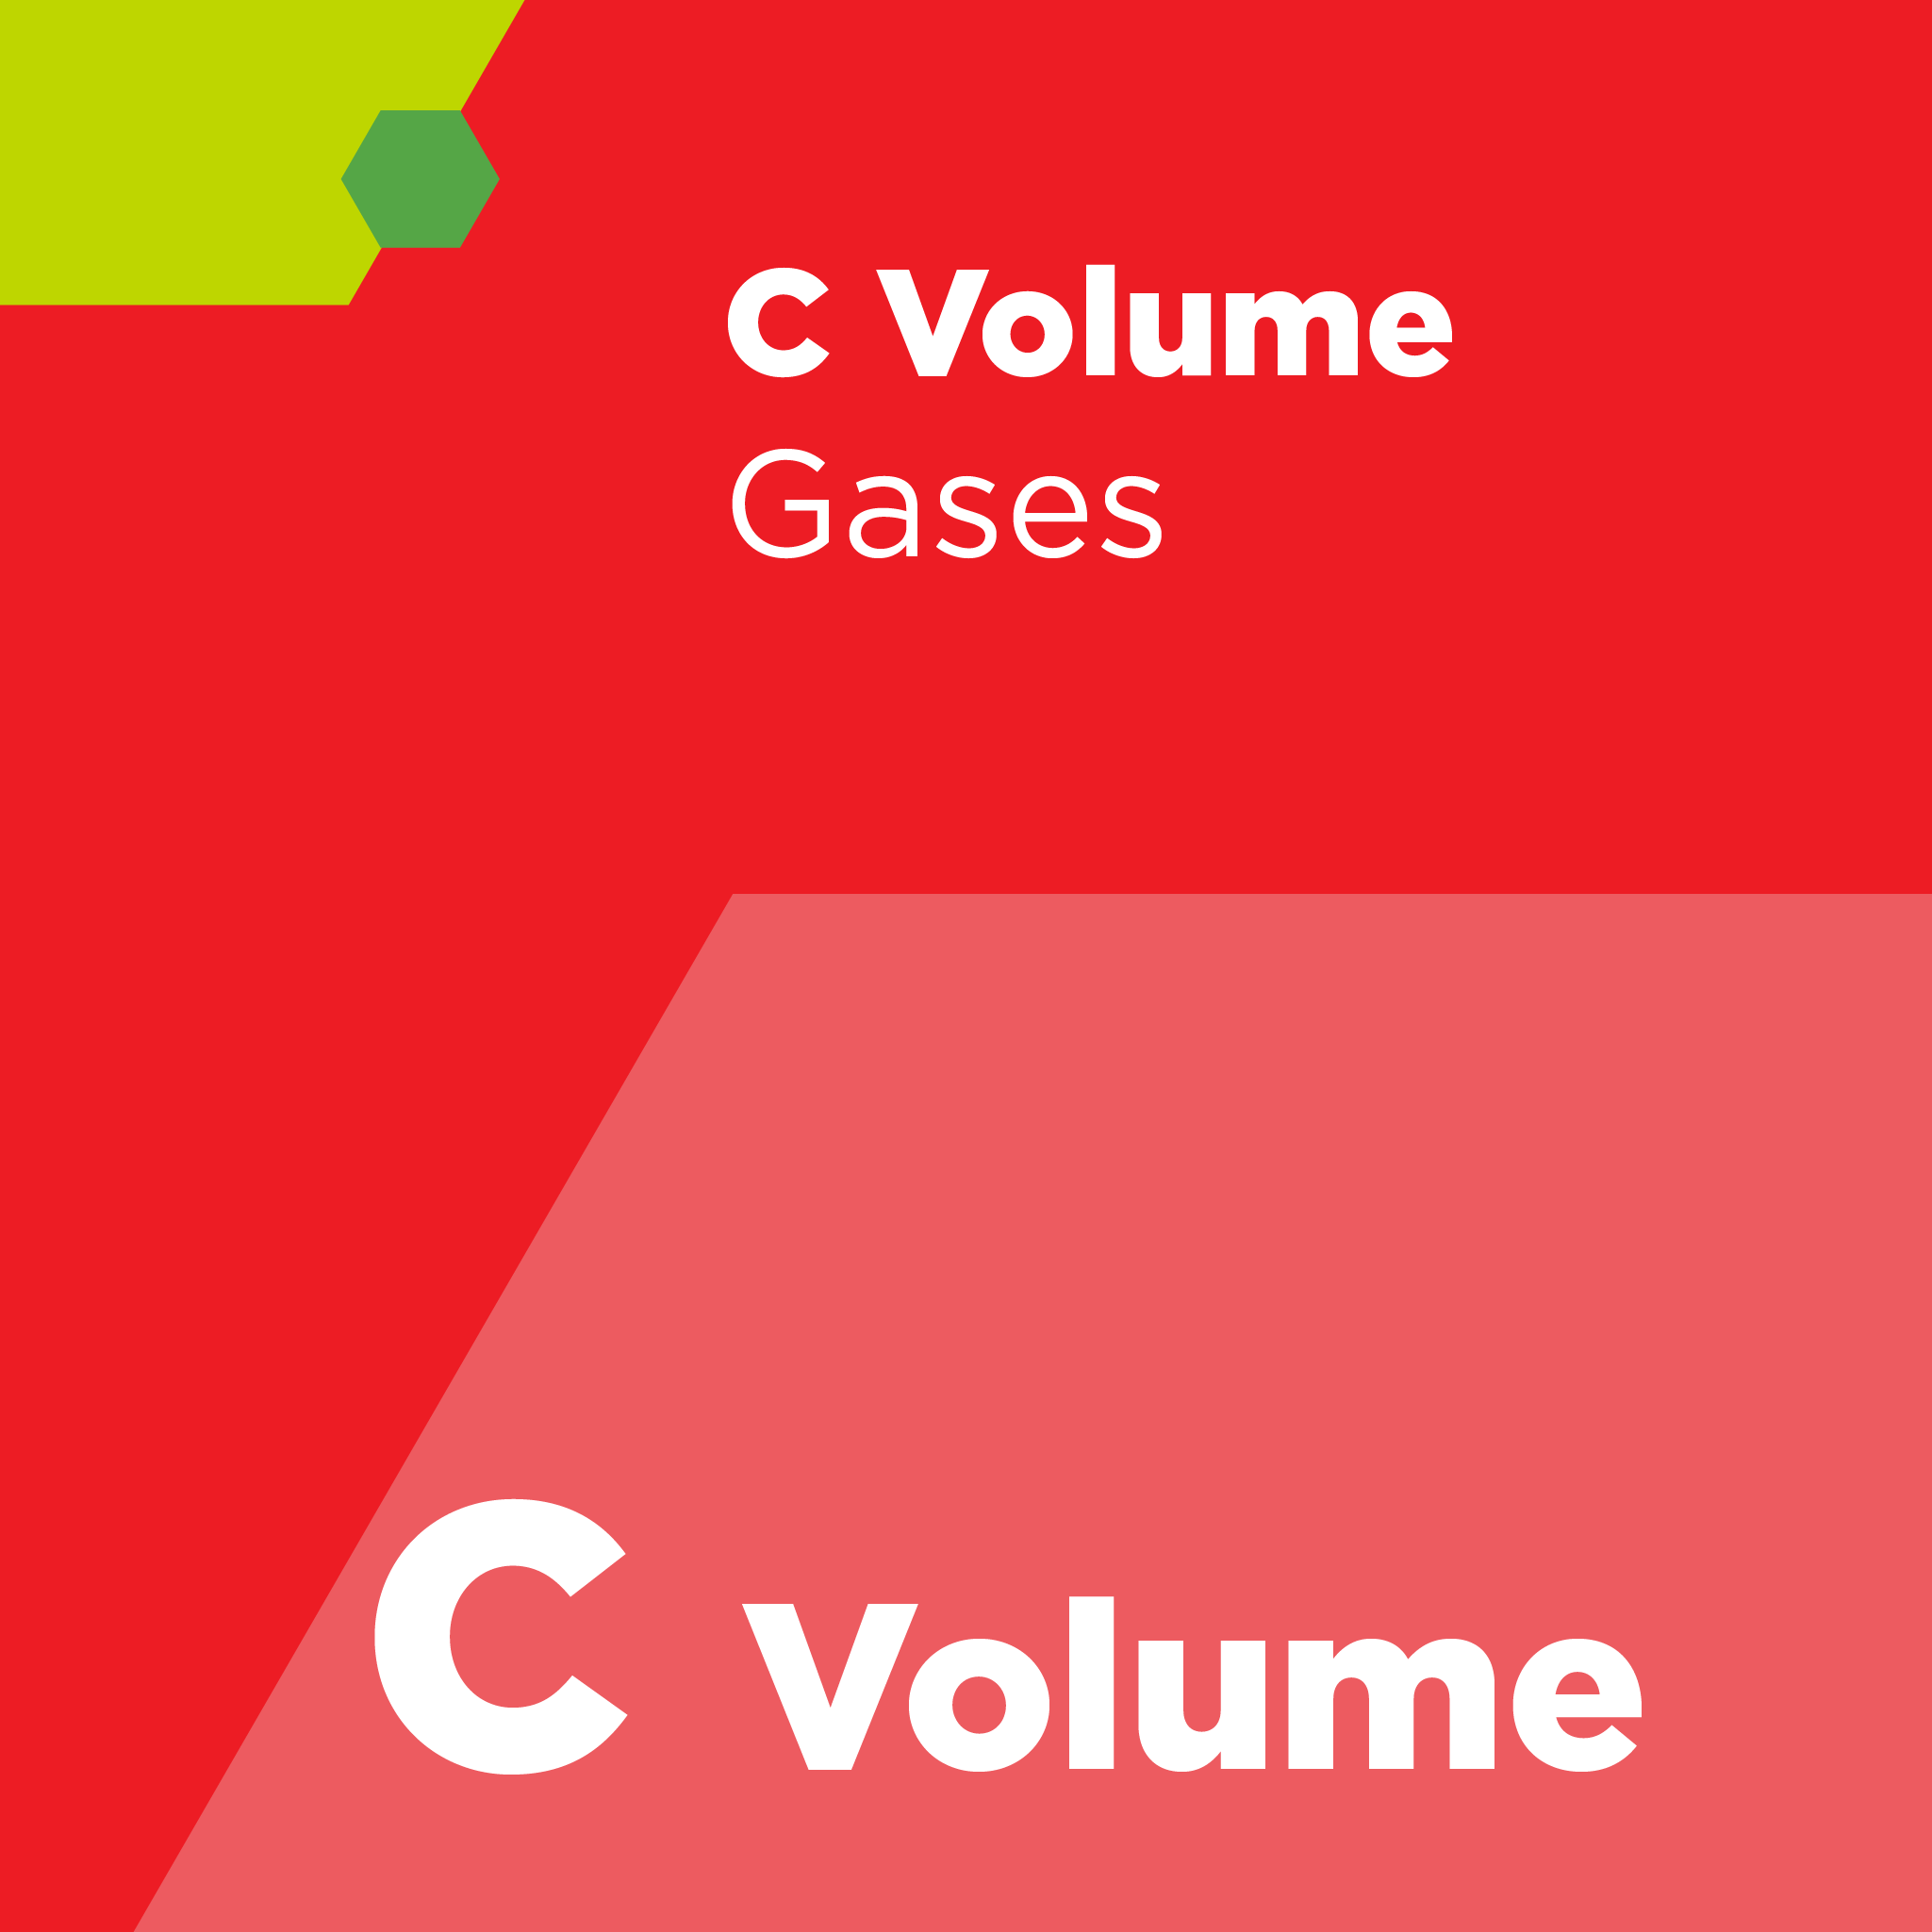 C05200 - SEMI C52 - Specification for the Shelf Life of a Specialty Gas